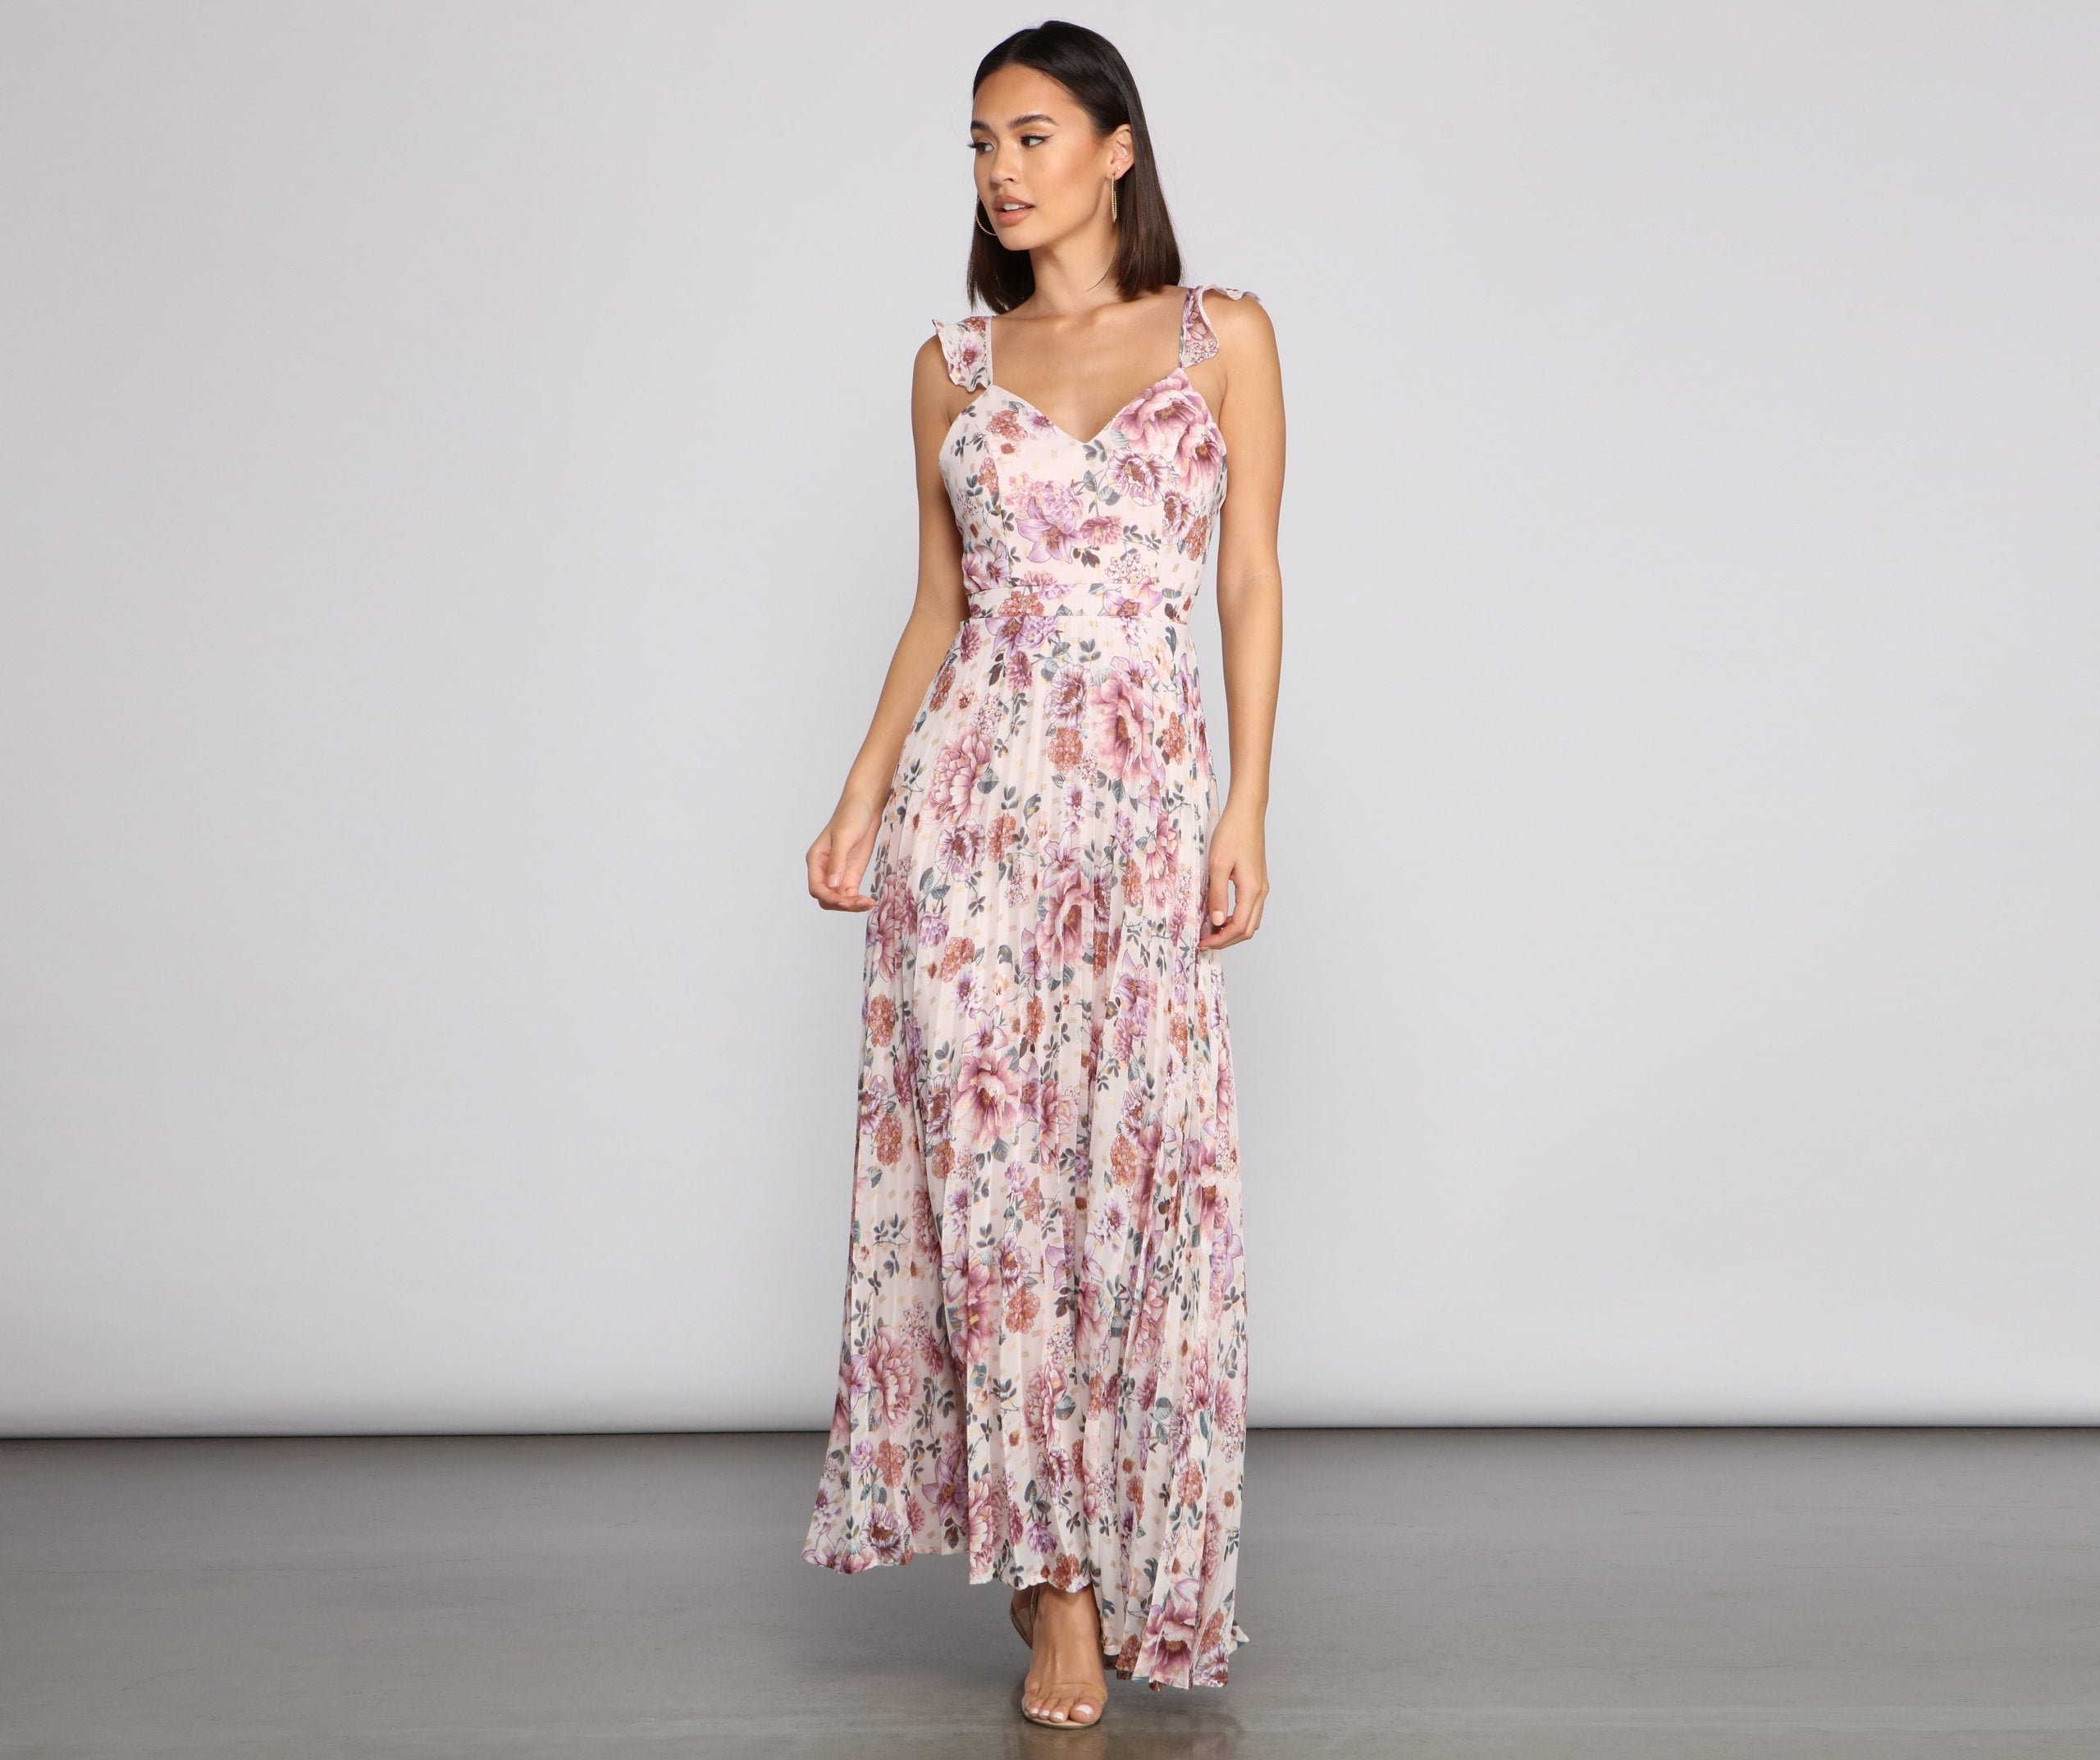 Ava Formal Floral Pleated Dresses